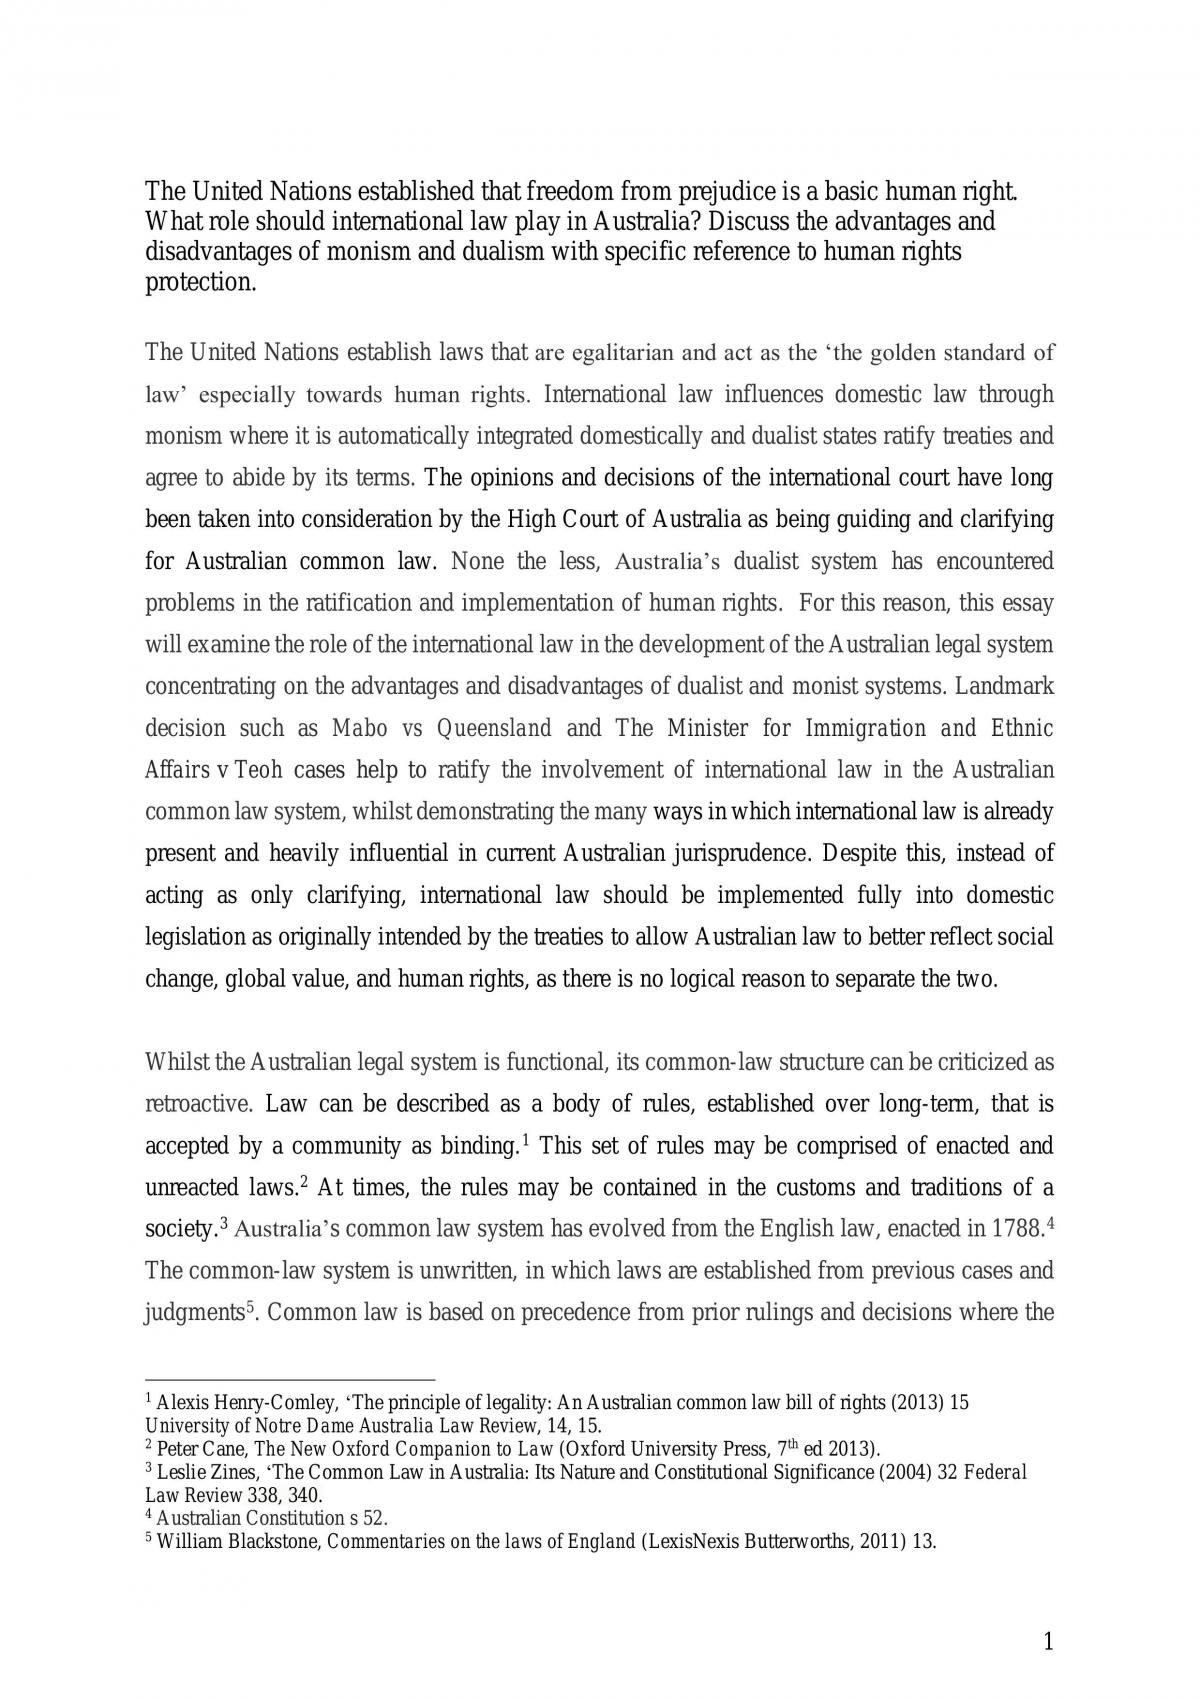 What role should international law play in Australia? Discuss the advantages and disadvantages of monism and dualism - Page 1